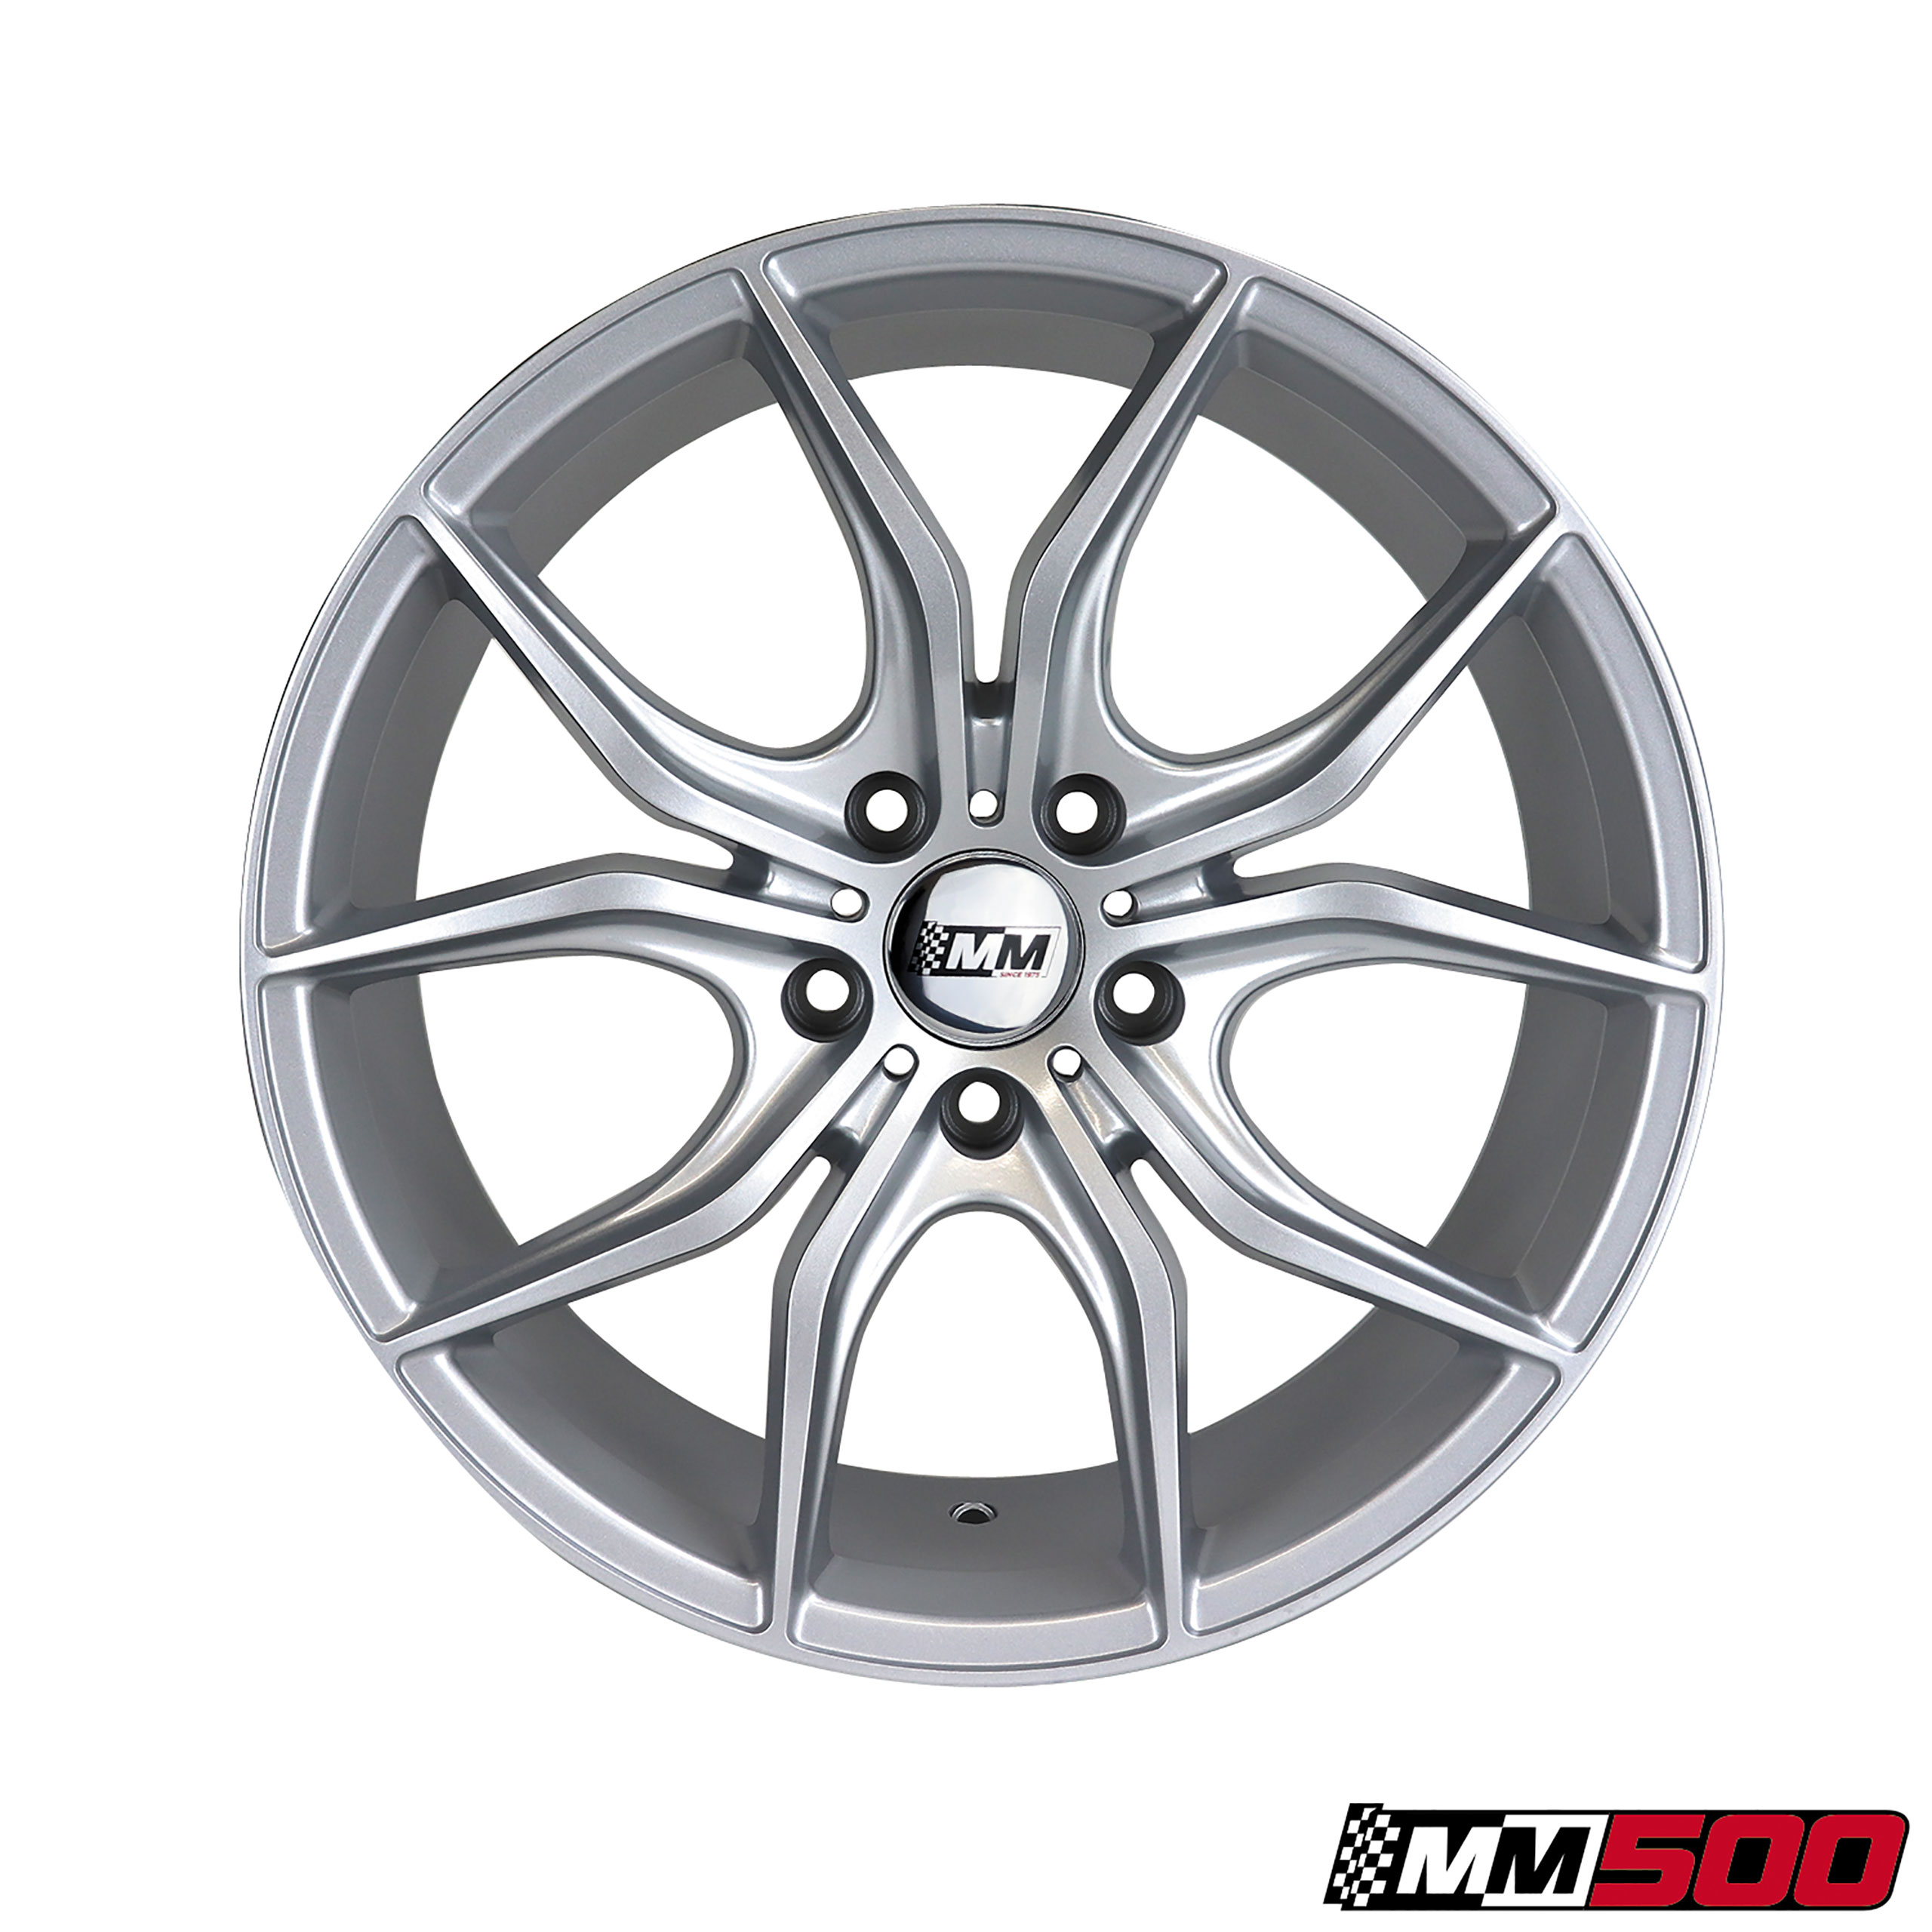 MM500 18x8 Wheel - Silver For 1979-2014 Ford Mustang